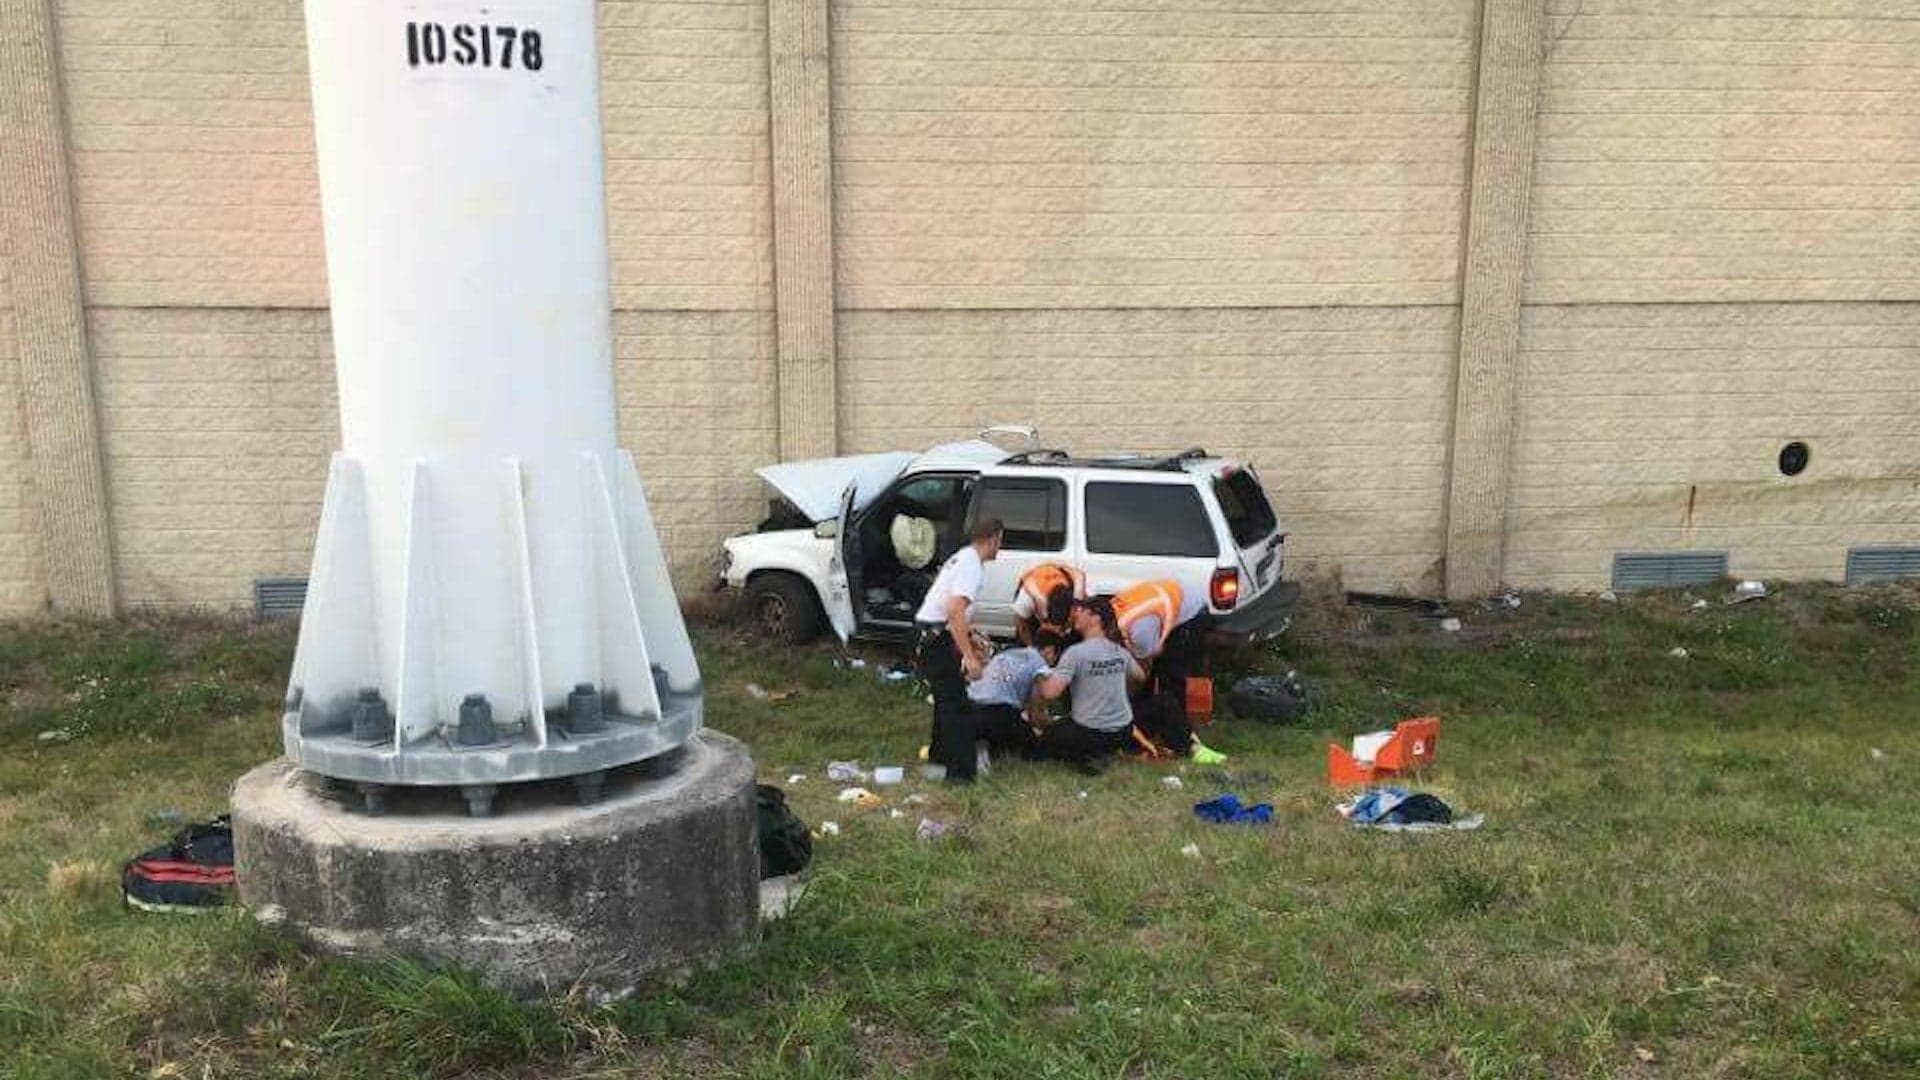 14-Year-Old in Florida Crashes Ford Explorer, Injuring 7, After Mom Allegedly Lets Him Drive